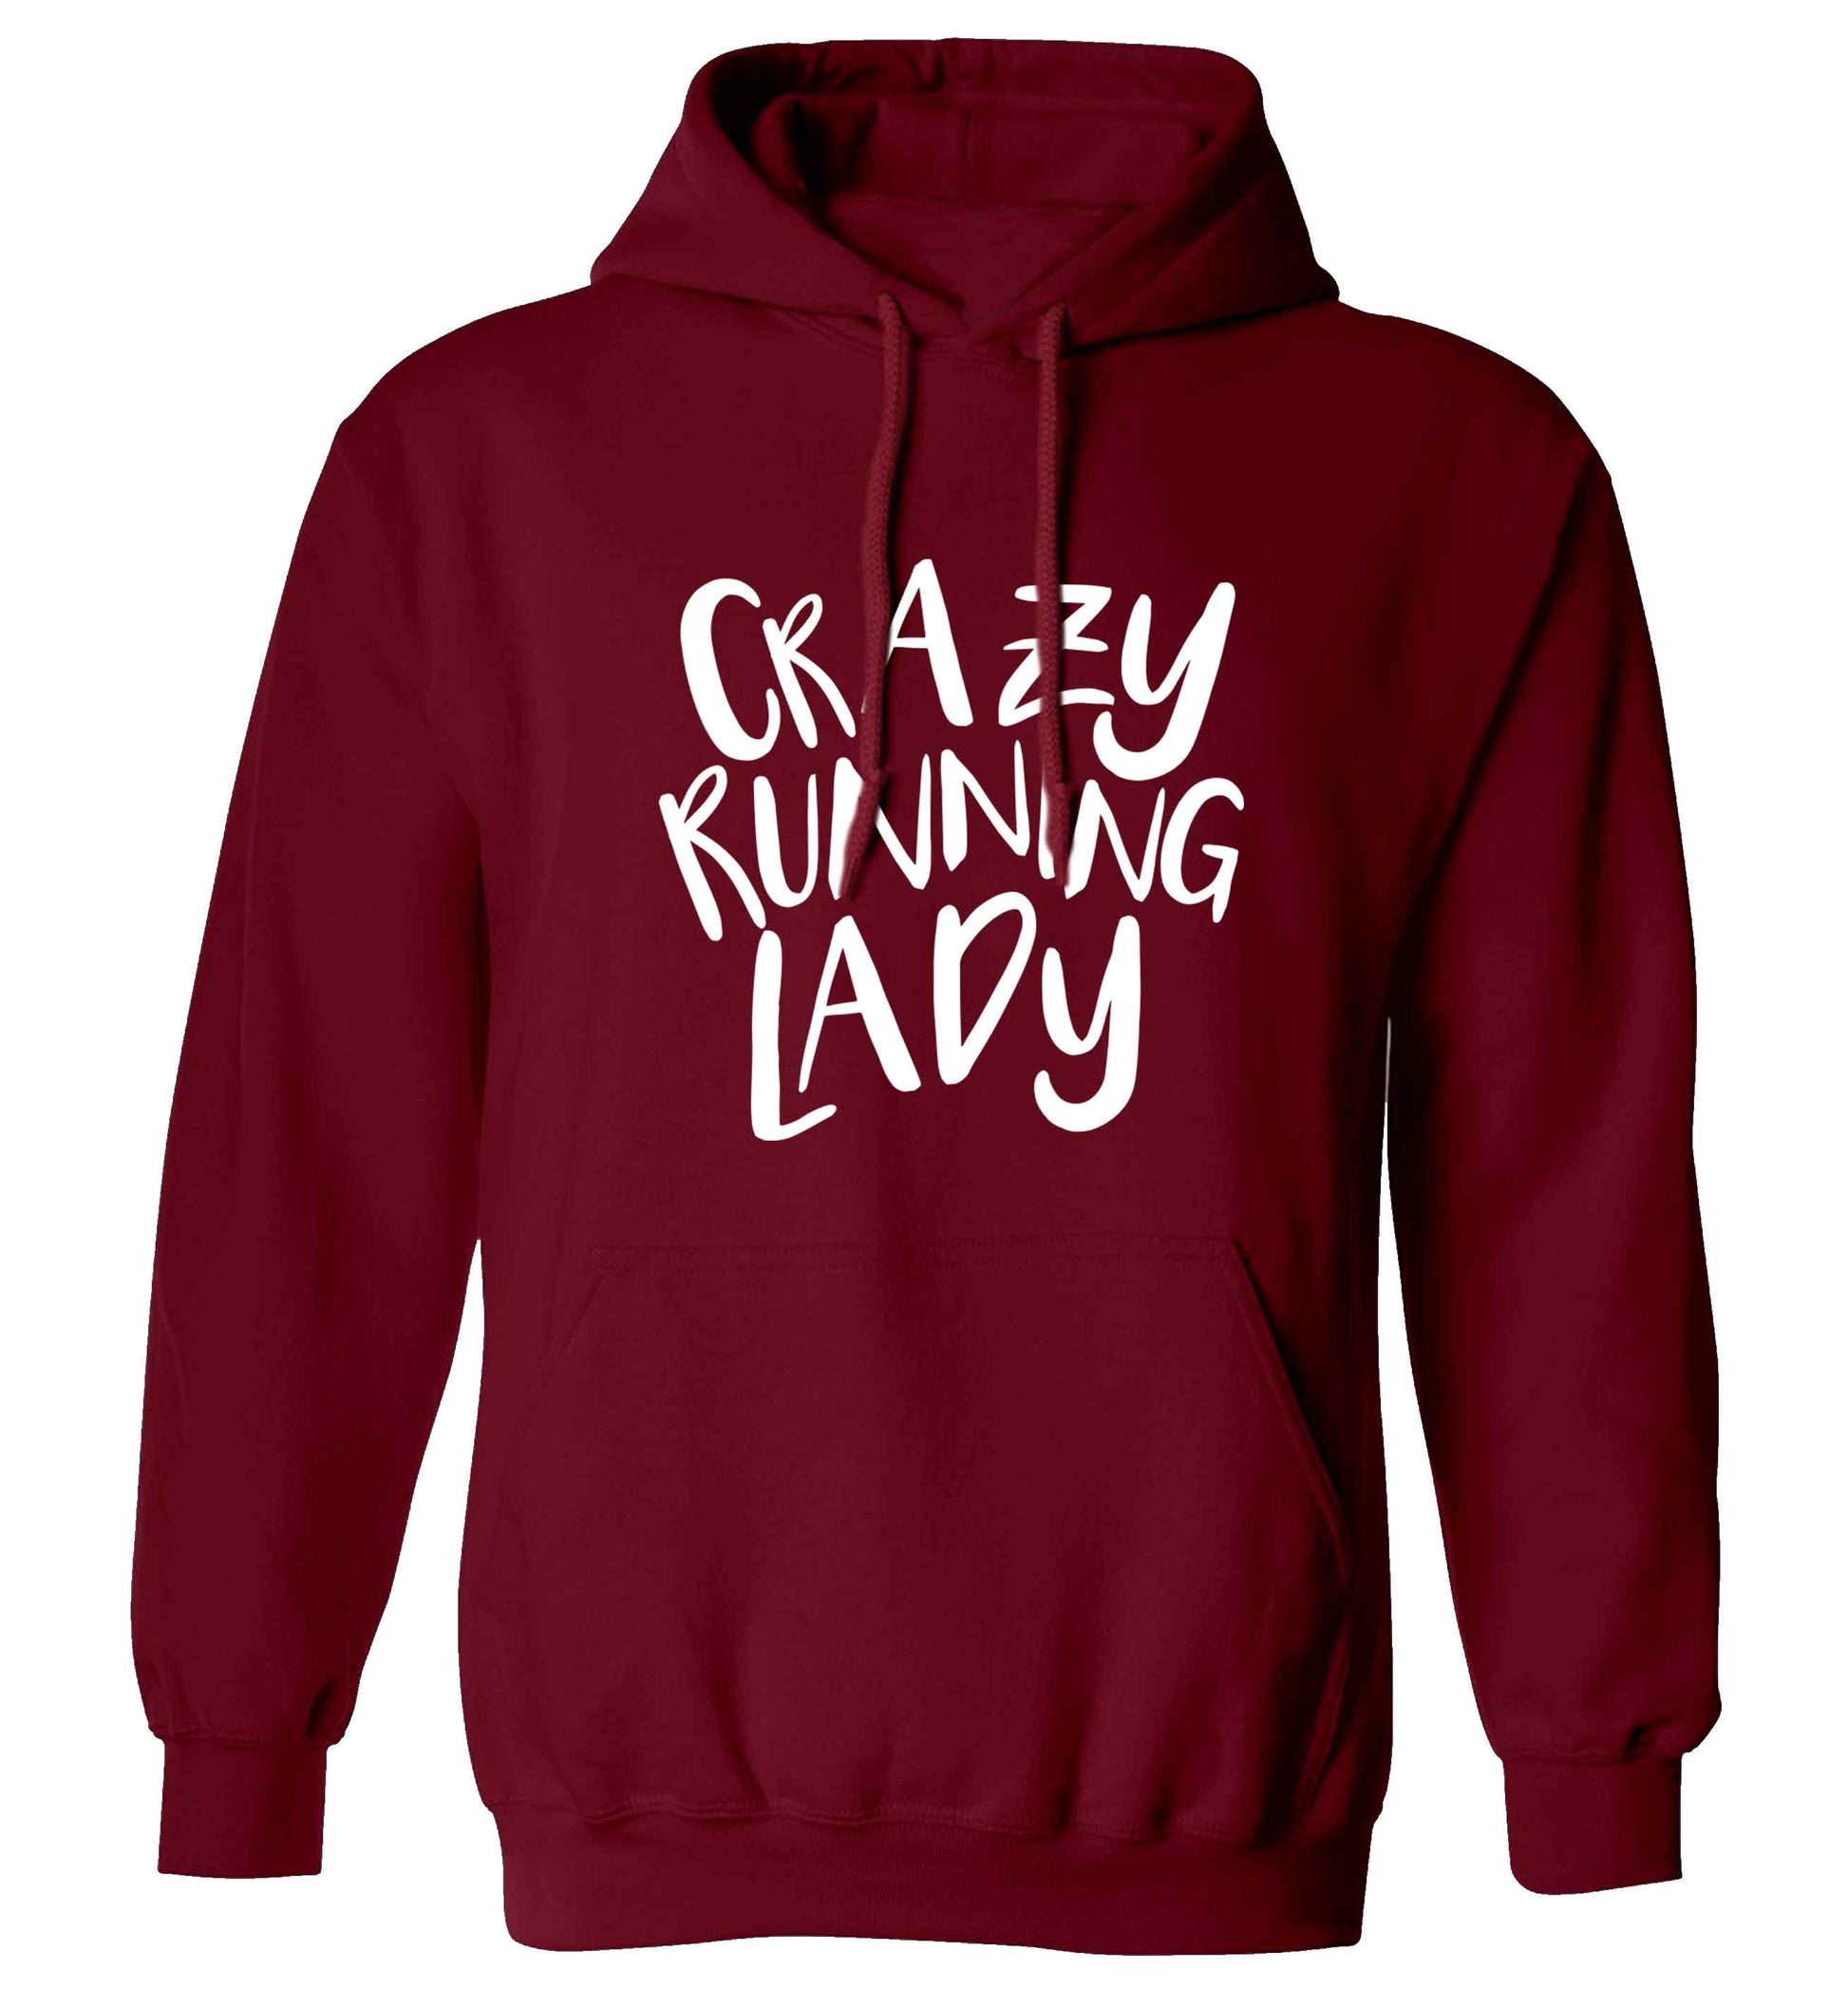 Crazy running lady adults unisex maroon hoodie 2XL